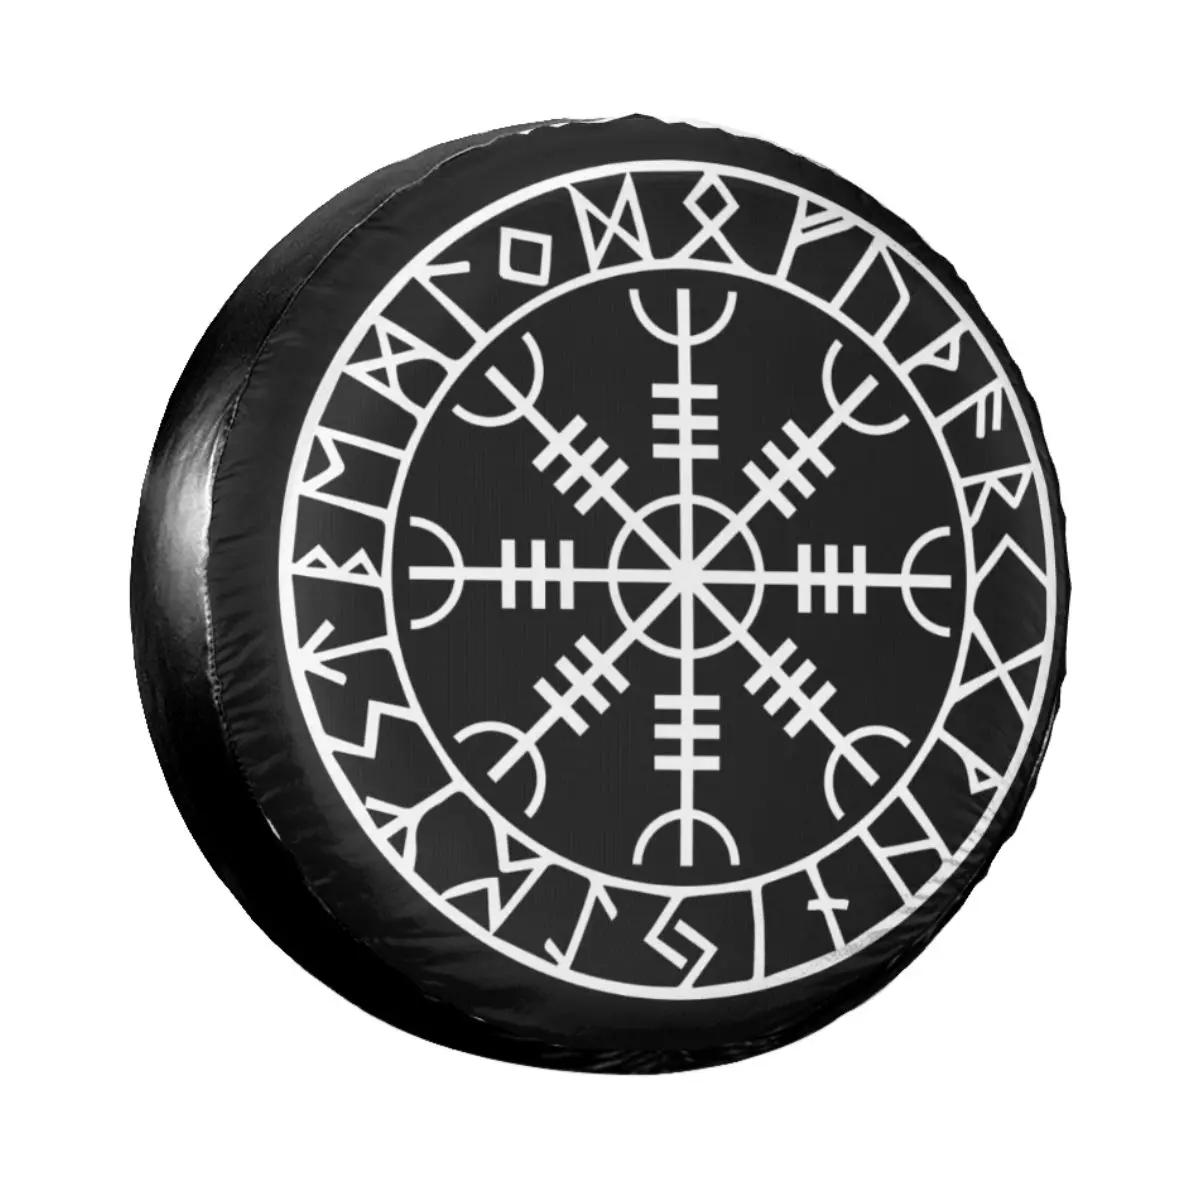 

Norse Viking Rune Amulet Spare Tire Cover for Jeep Trailer RV SUV Truck Camper Travel Icelandic Vegvisir Compass Car Wheel